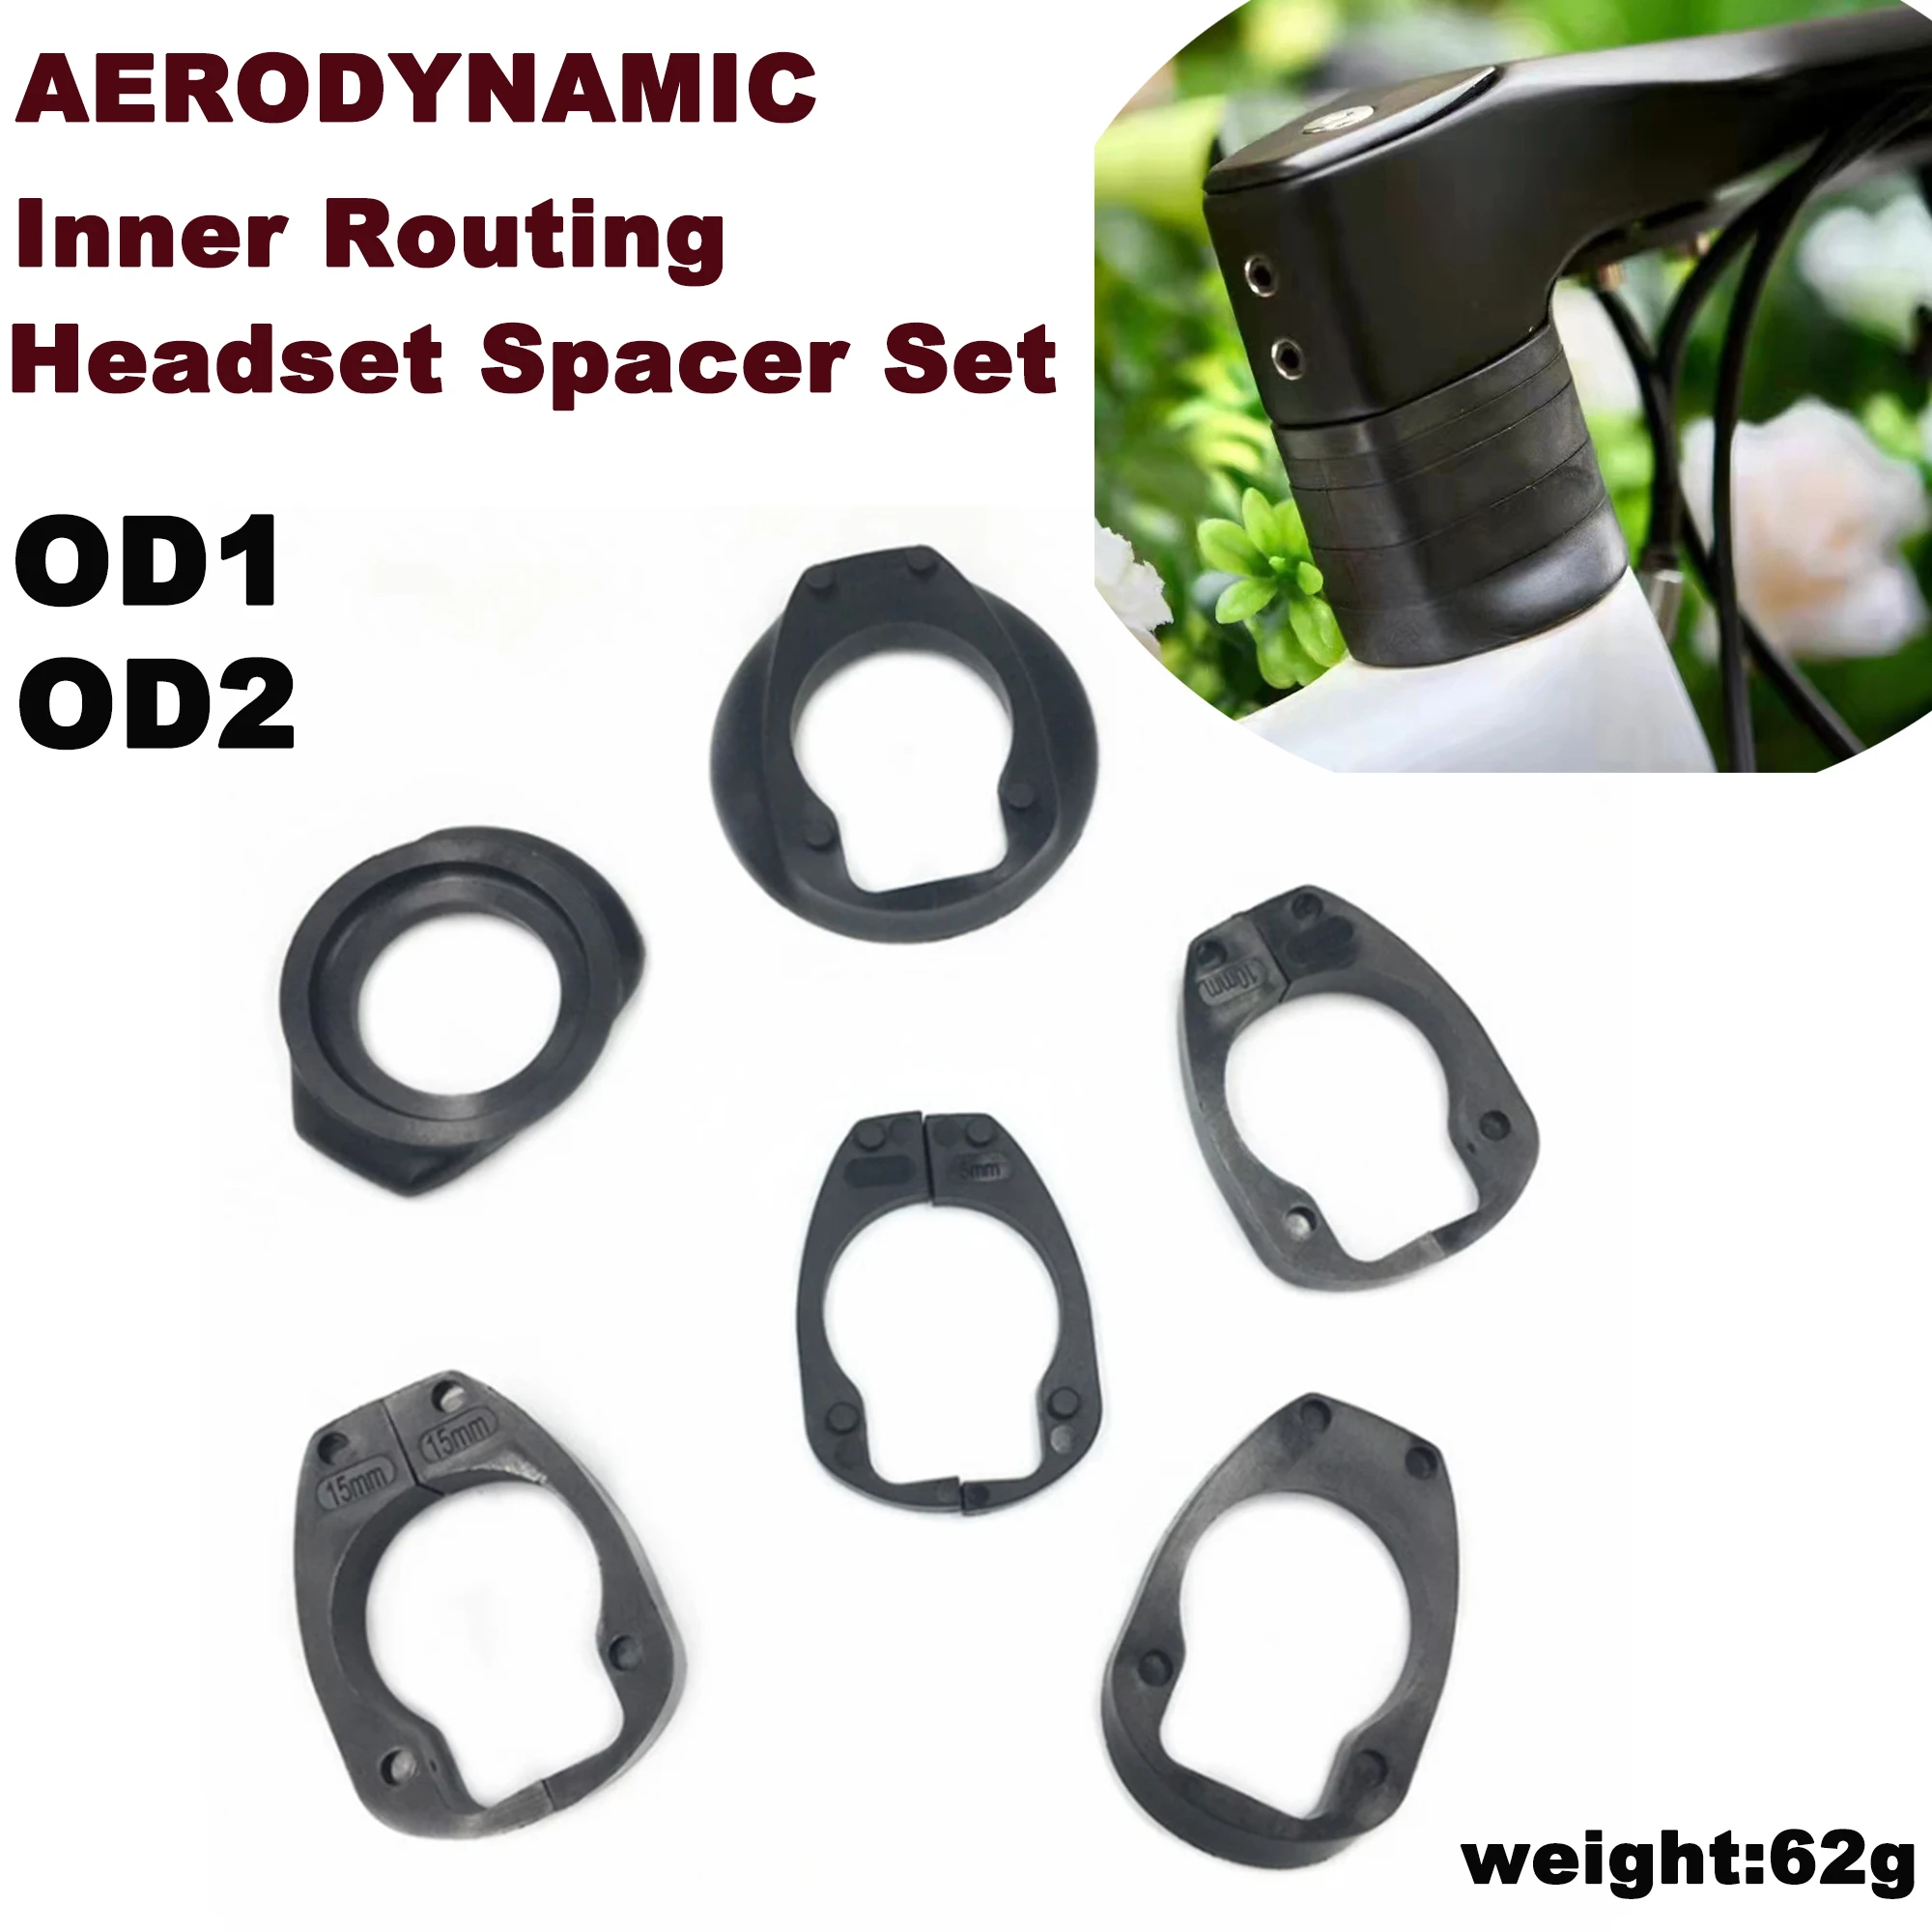 B05 B06 Handlebar Plastic Spacer Set for 28.6mm and 31.8mm OD1 OD2 Fork Integrated Handlebar Headset Washer Road Bicycle Parts